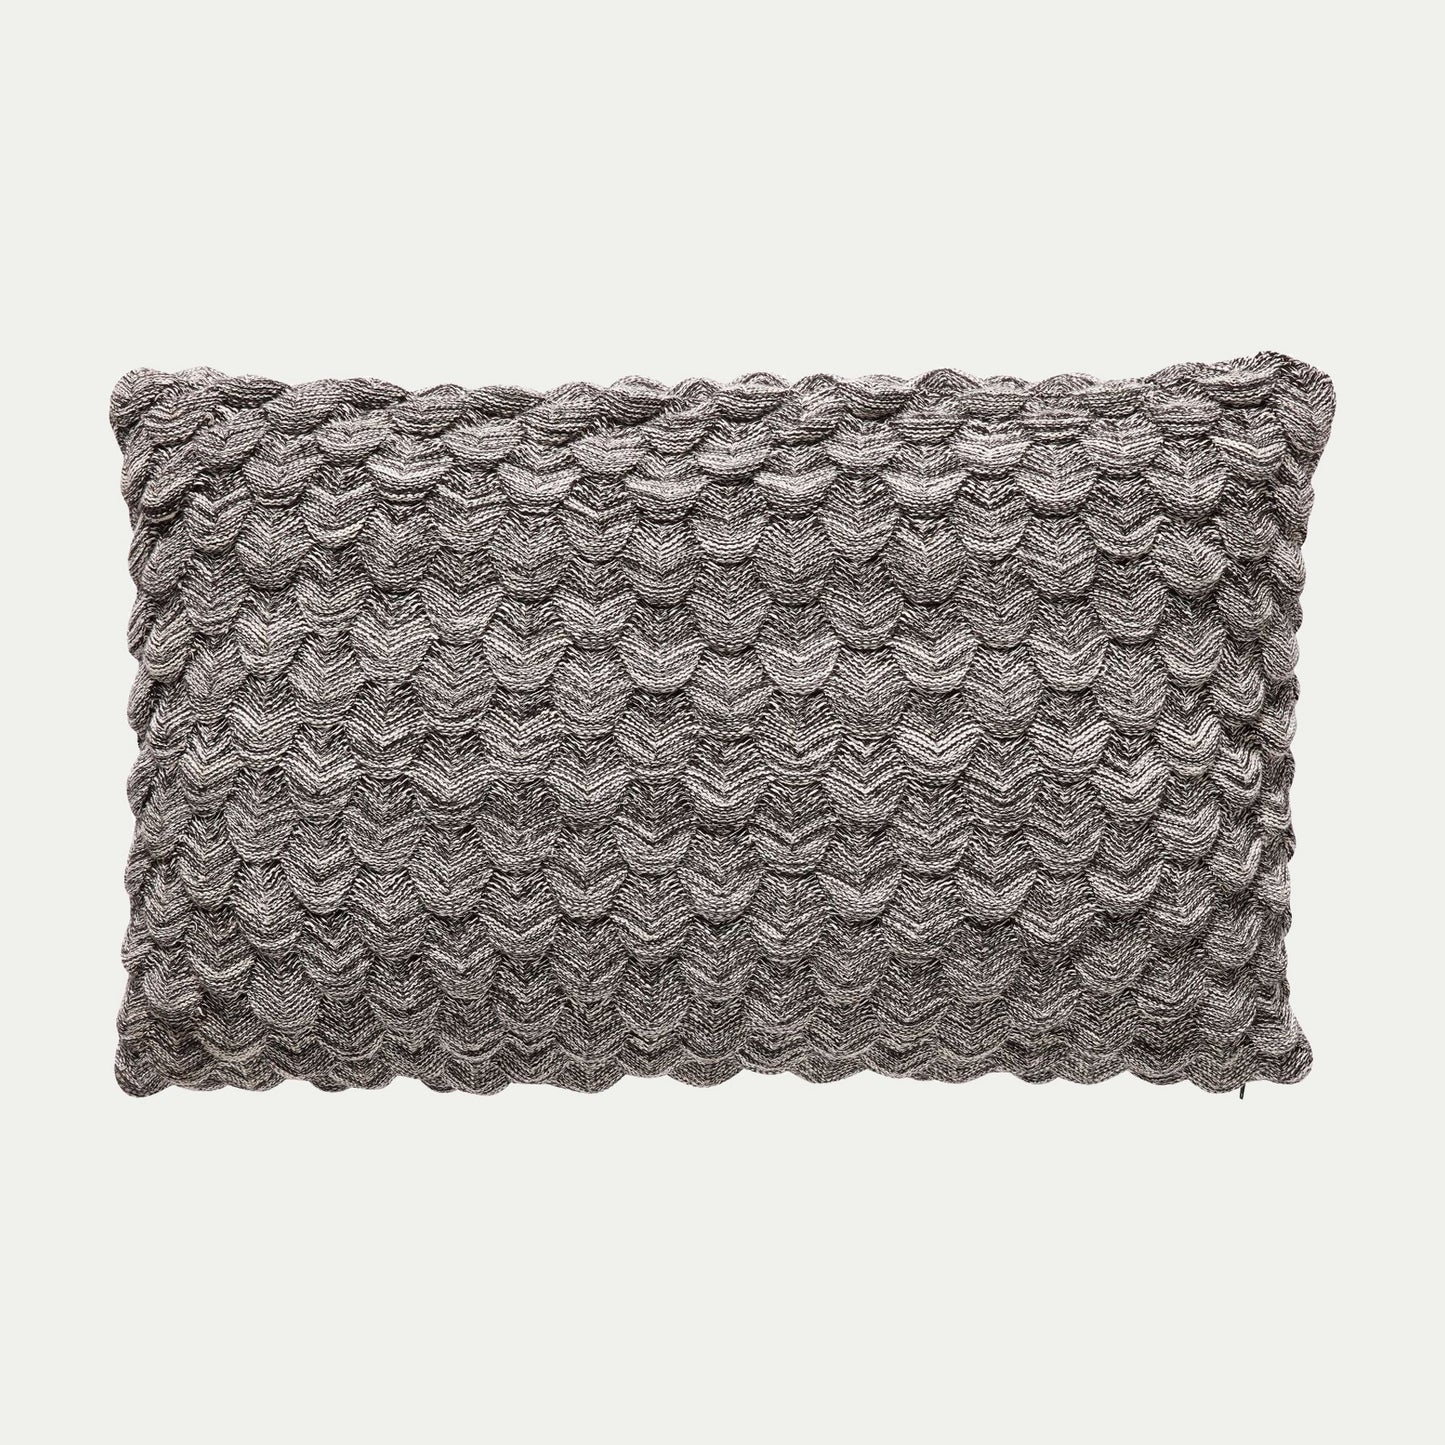 Hubsch Interior large oversized cotton scale knit cushion in charcoal grey and cream on white background